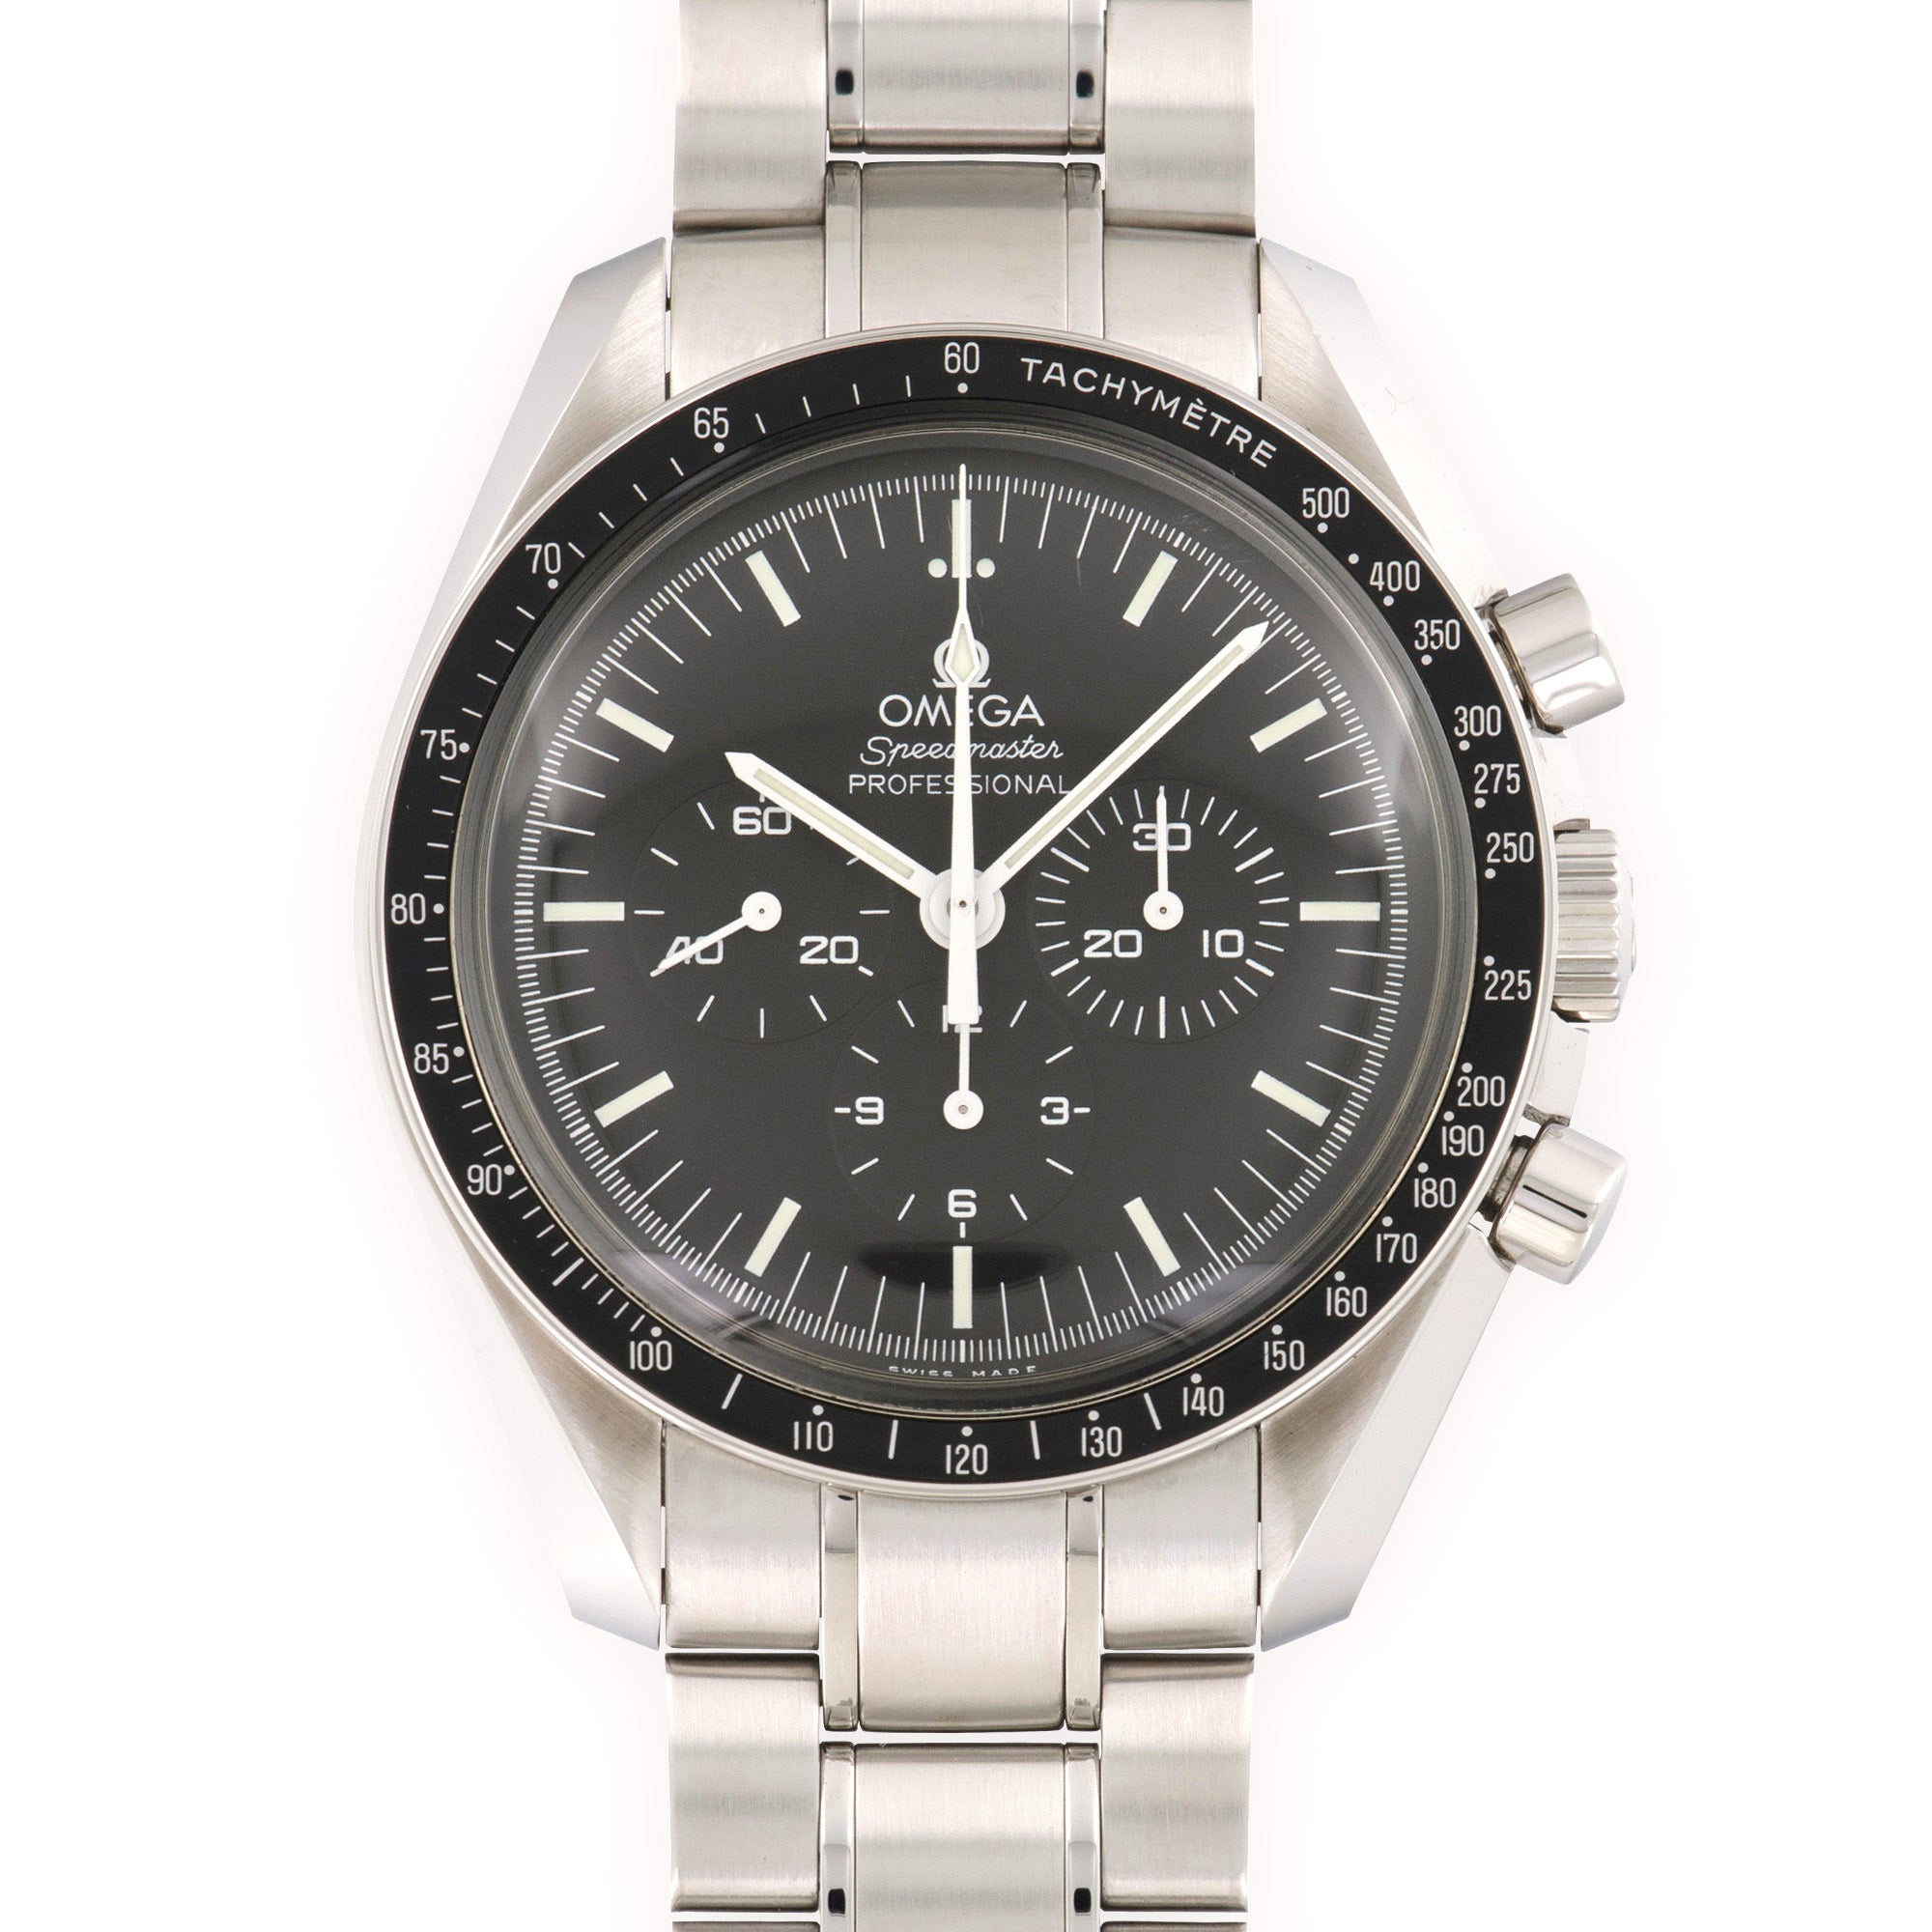 Omega - Omega Speedmaster Professional Man on the Moon Watch - The Keystone Watches